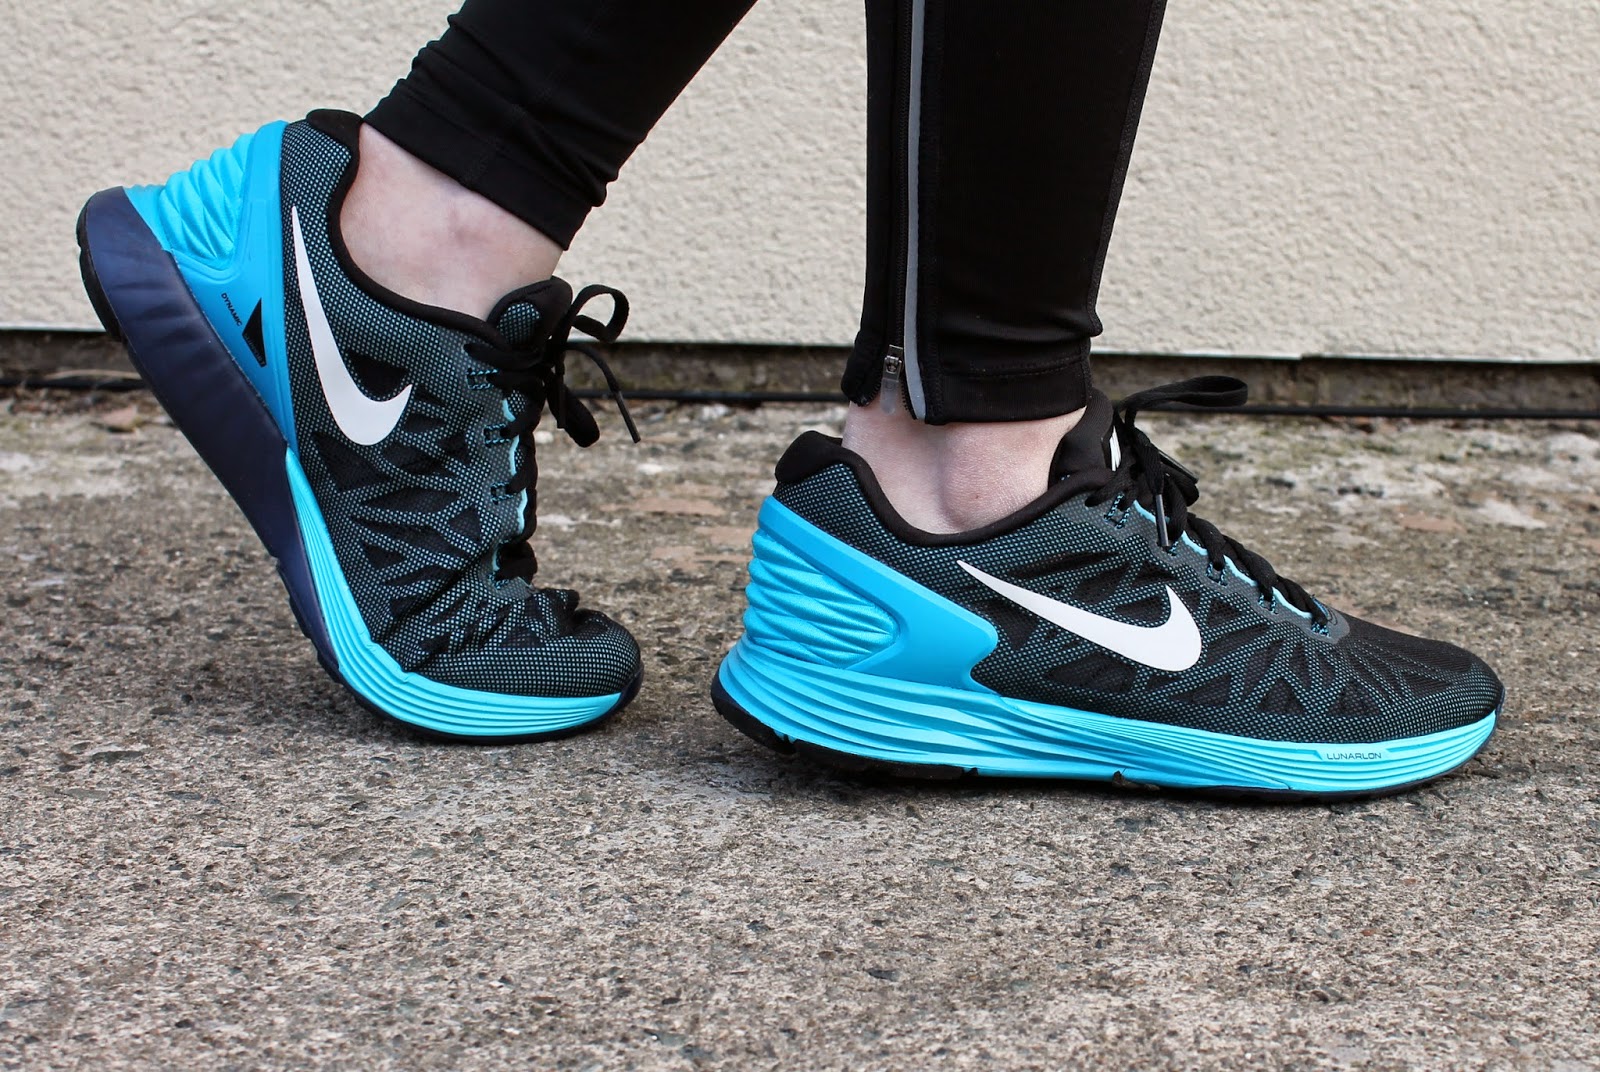 nike lunar glide womens trainers black and blue running shoes fashion blogger review